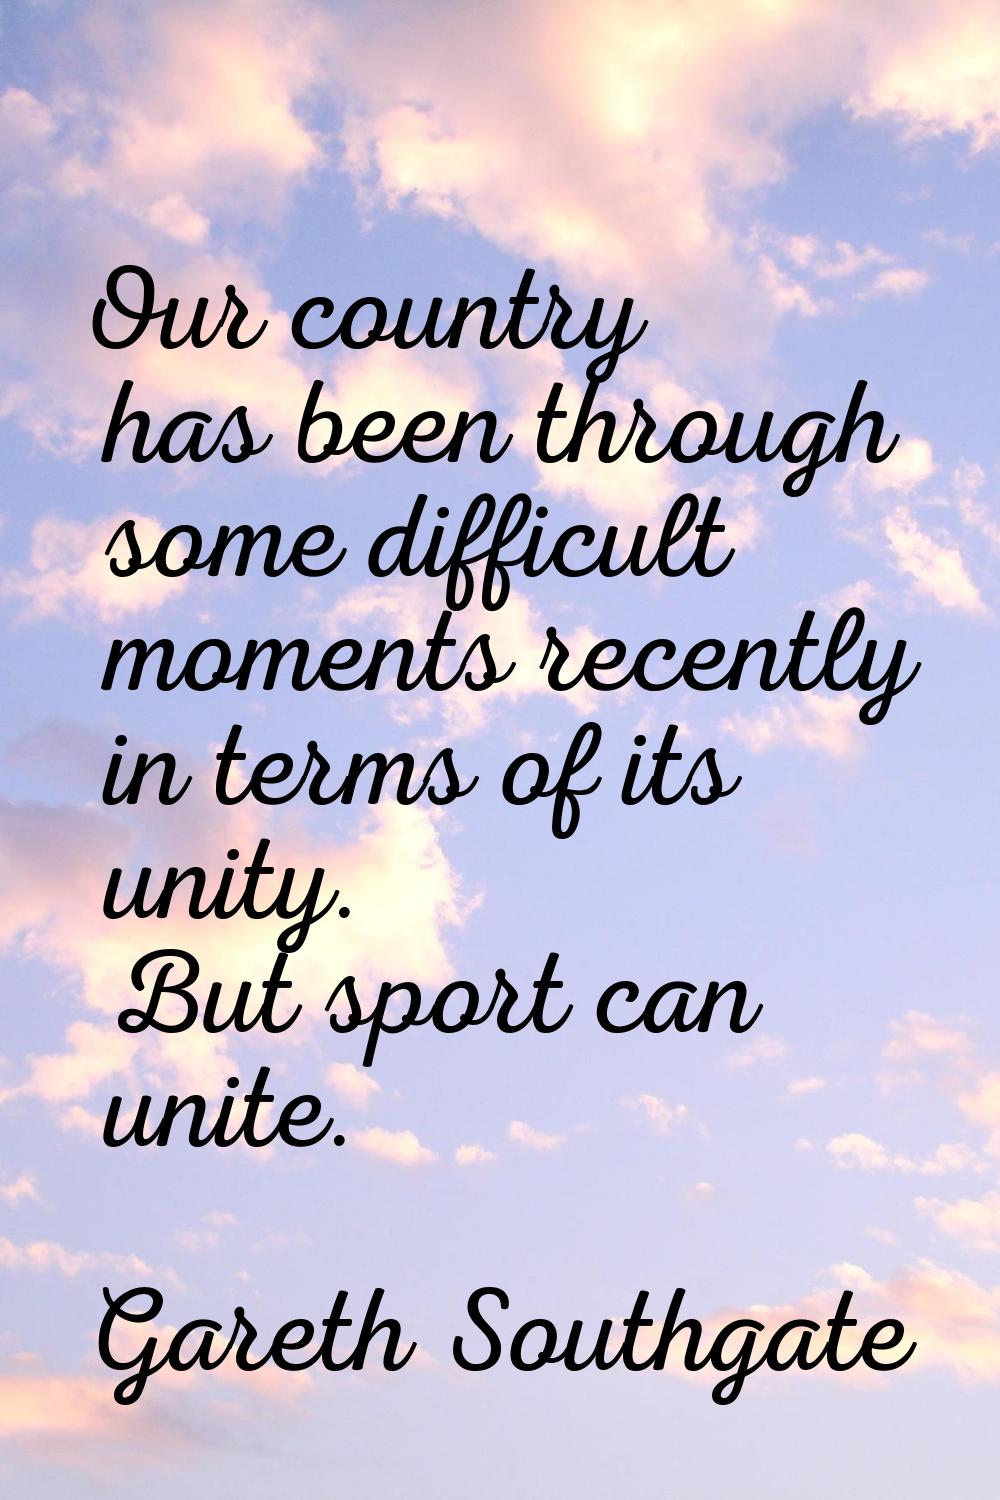 Our country has been through some difficult moments recently in terms of its unity. But sport can u